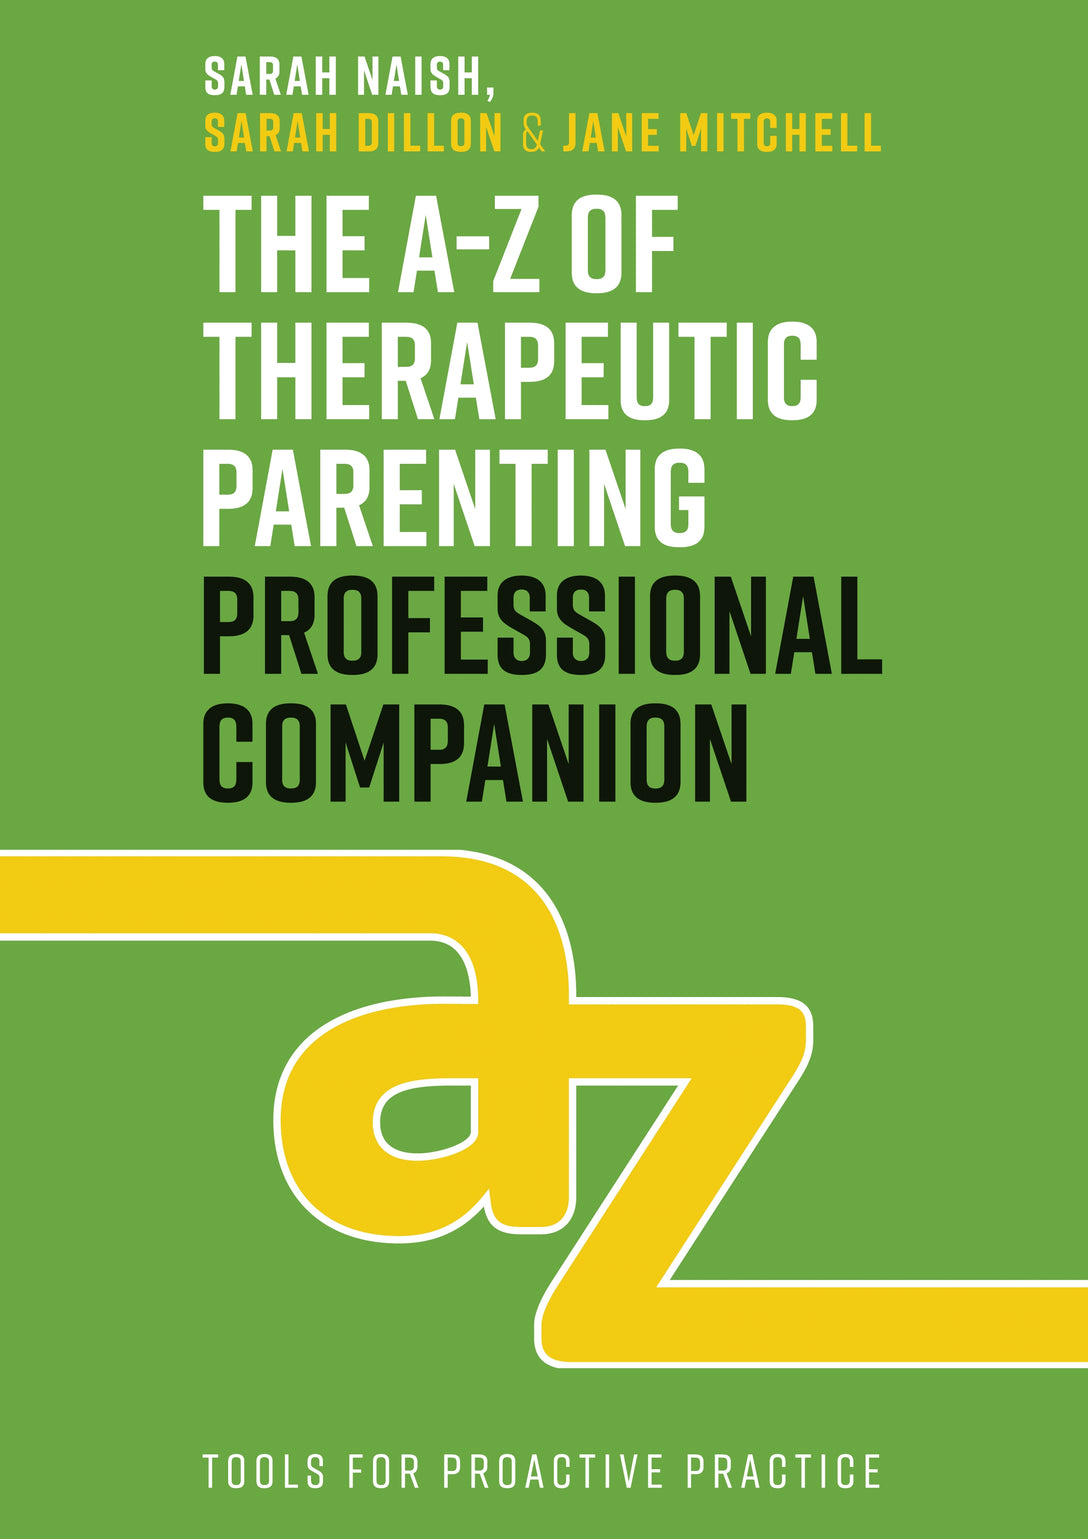 The A-Z of Therapeutic Parenting Professional Companion by Sarah Naish, Sarah Dillon, Jane Mitchell